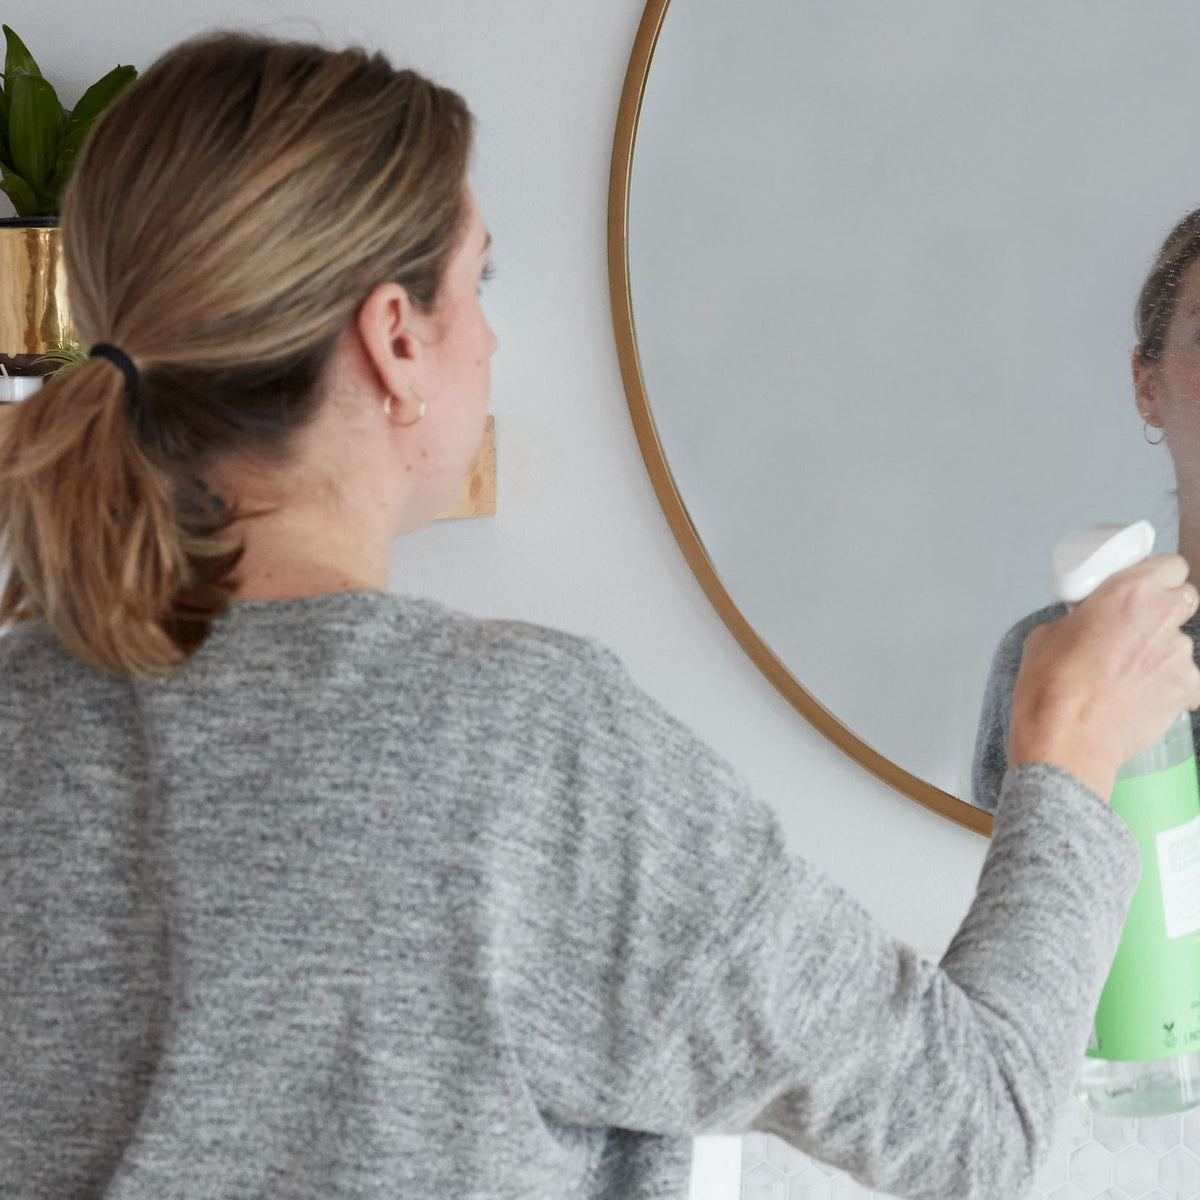 Lifestlye photo, a woman sprays a mirror with non-toxic cucumber mint glass cleaner.